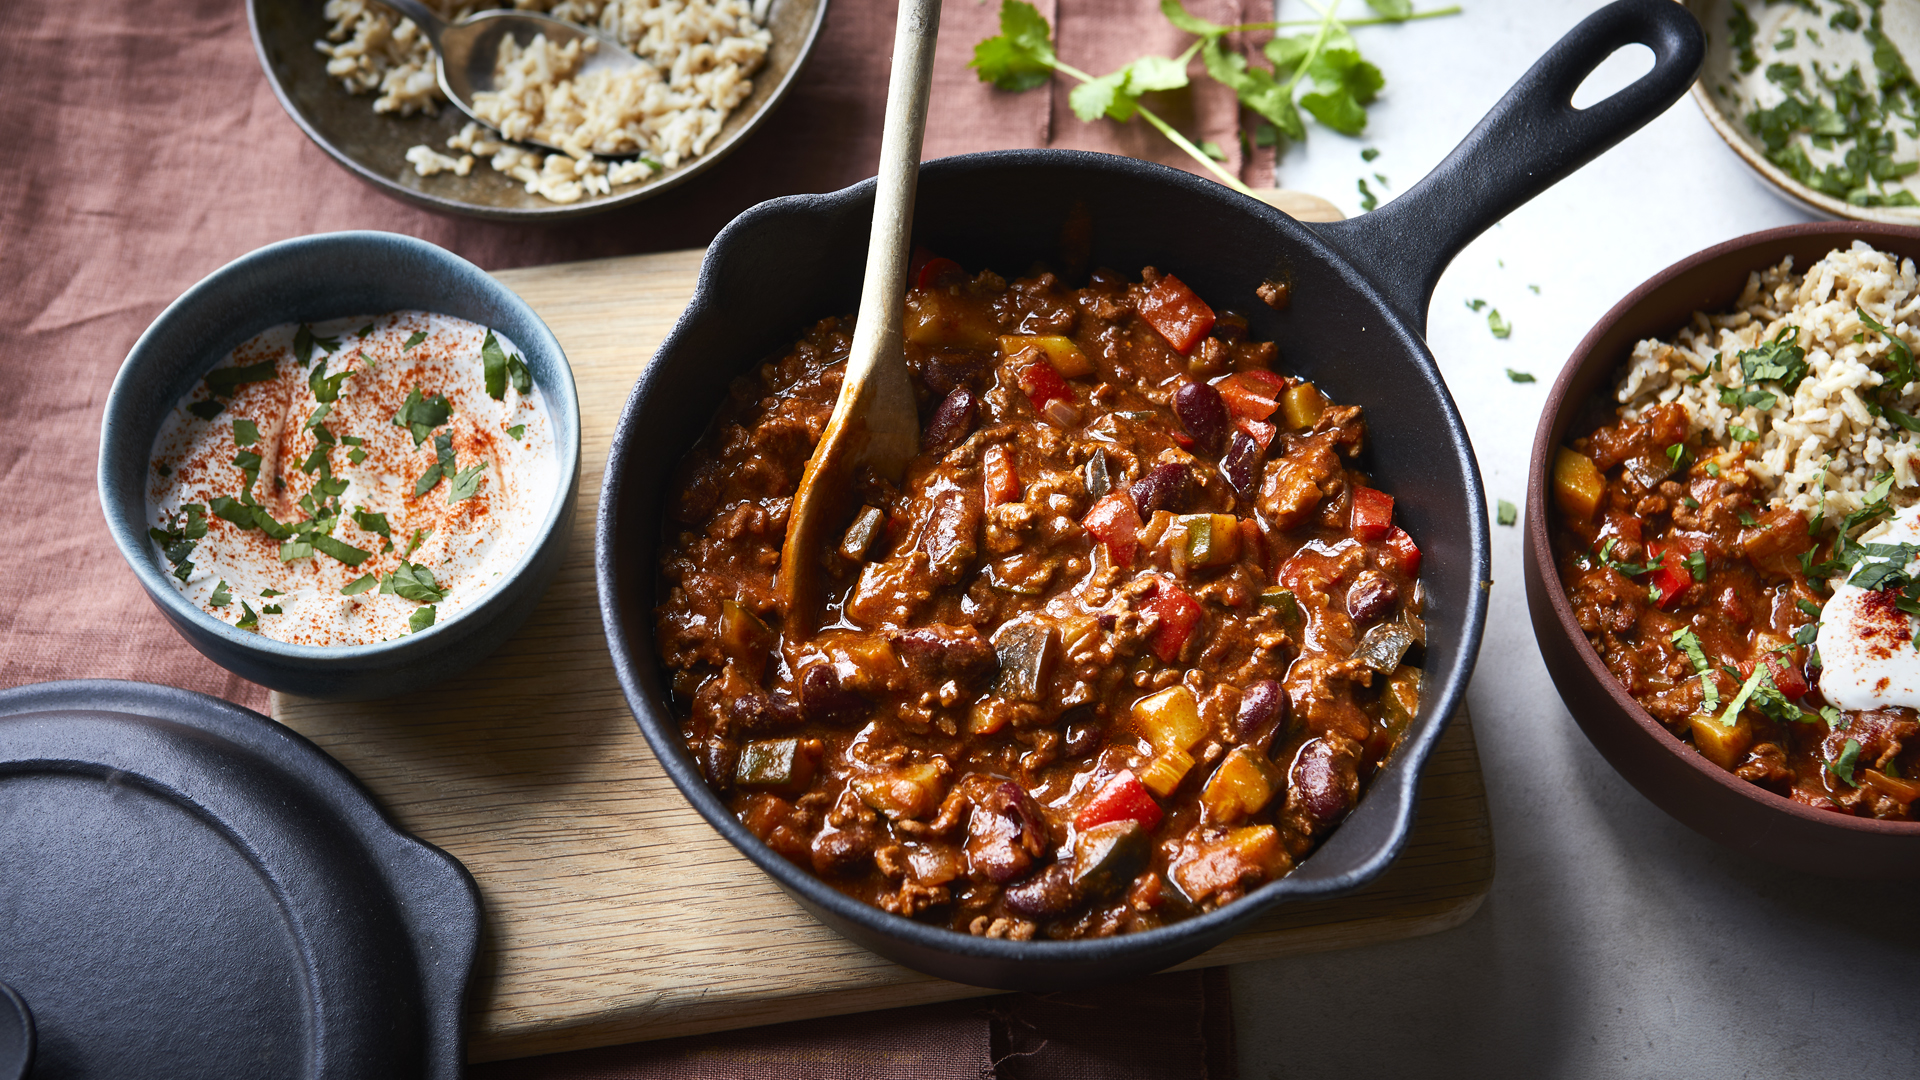 https://food-images.files.bbci.co.uk/food/recipes/healthy_chilli_con_carne_64911_16x9.jpg